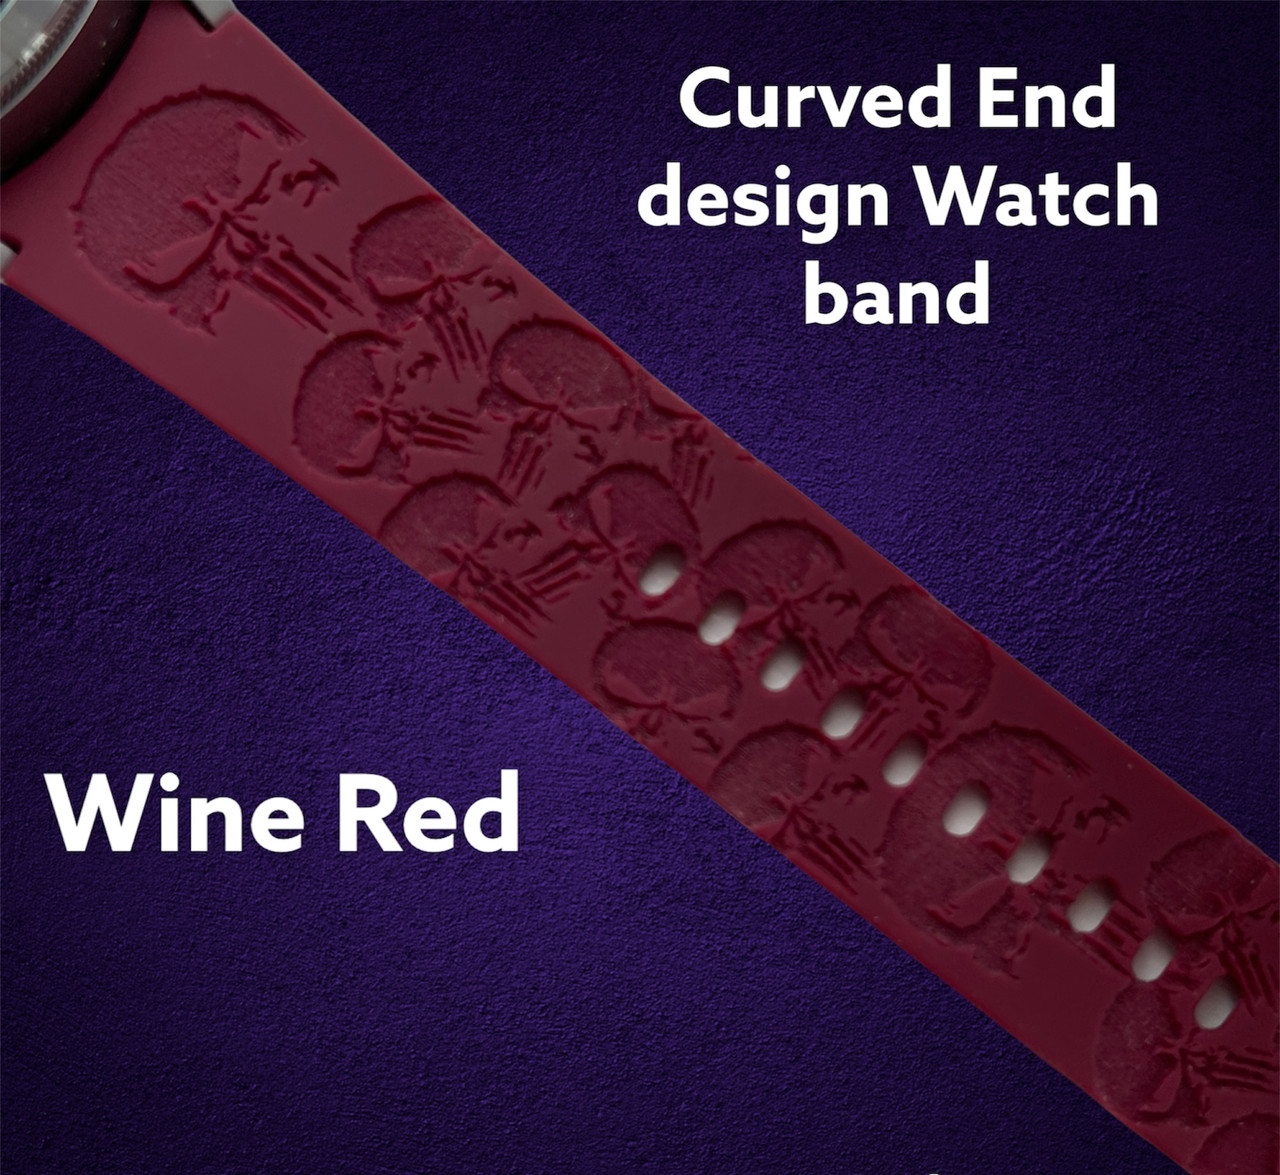 Luxury engraved silicone Apple watch band, engraved Samsung Watch band –  Plum Ink Designs